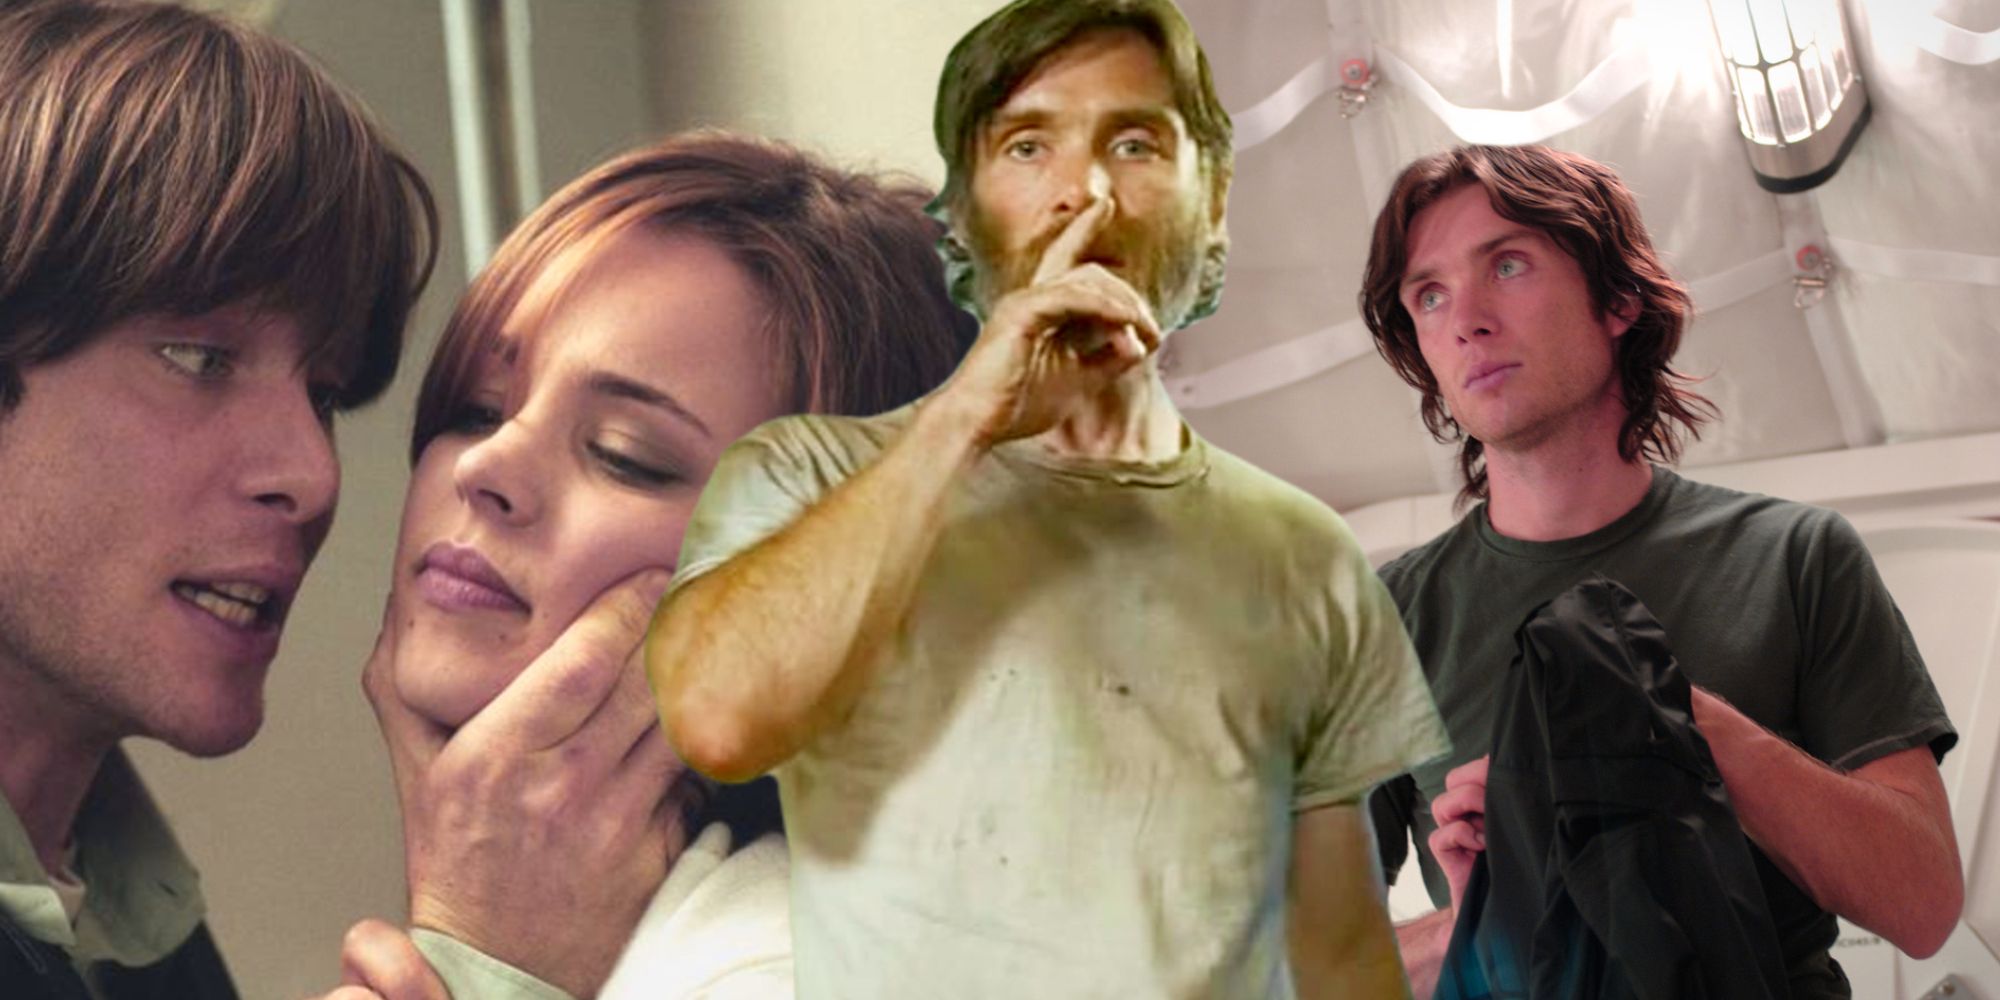 Cillian Murphys Horror Movies Ranked (Including Quiet Place 2)